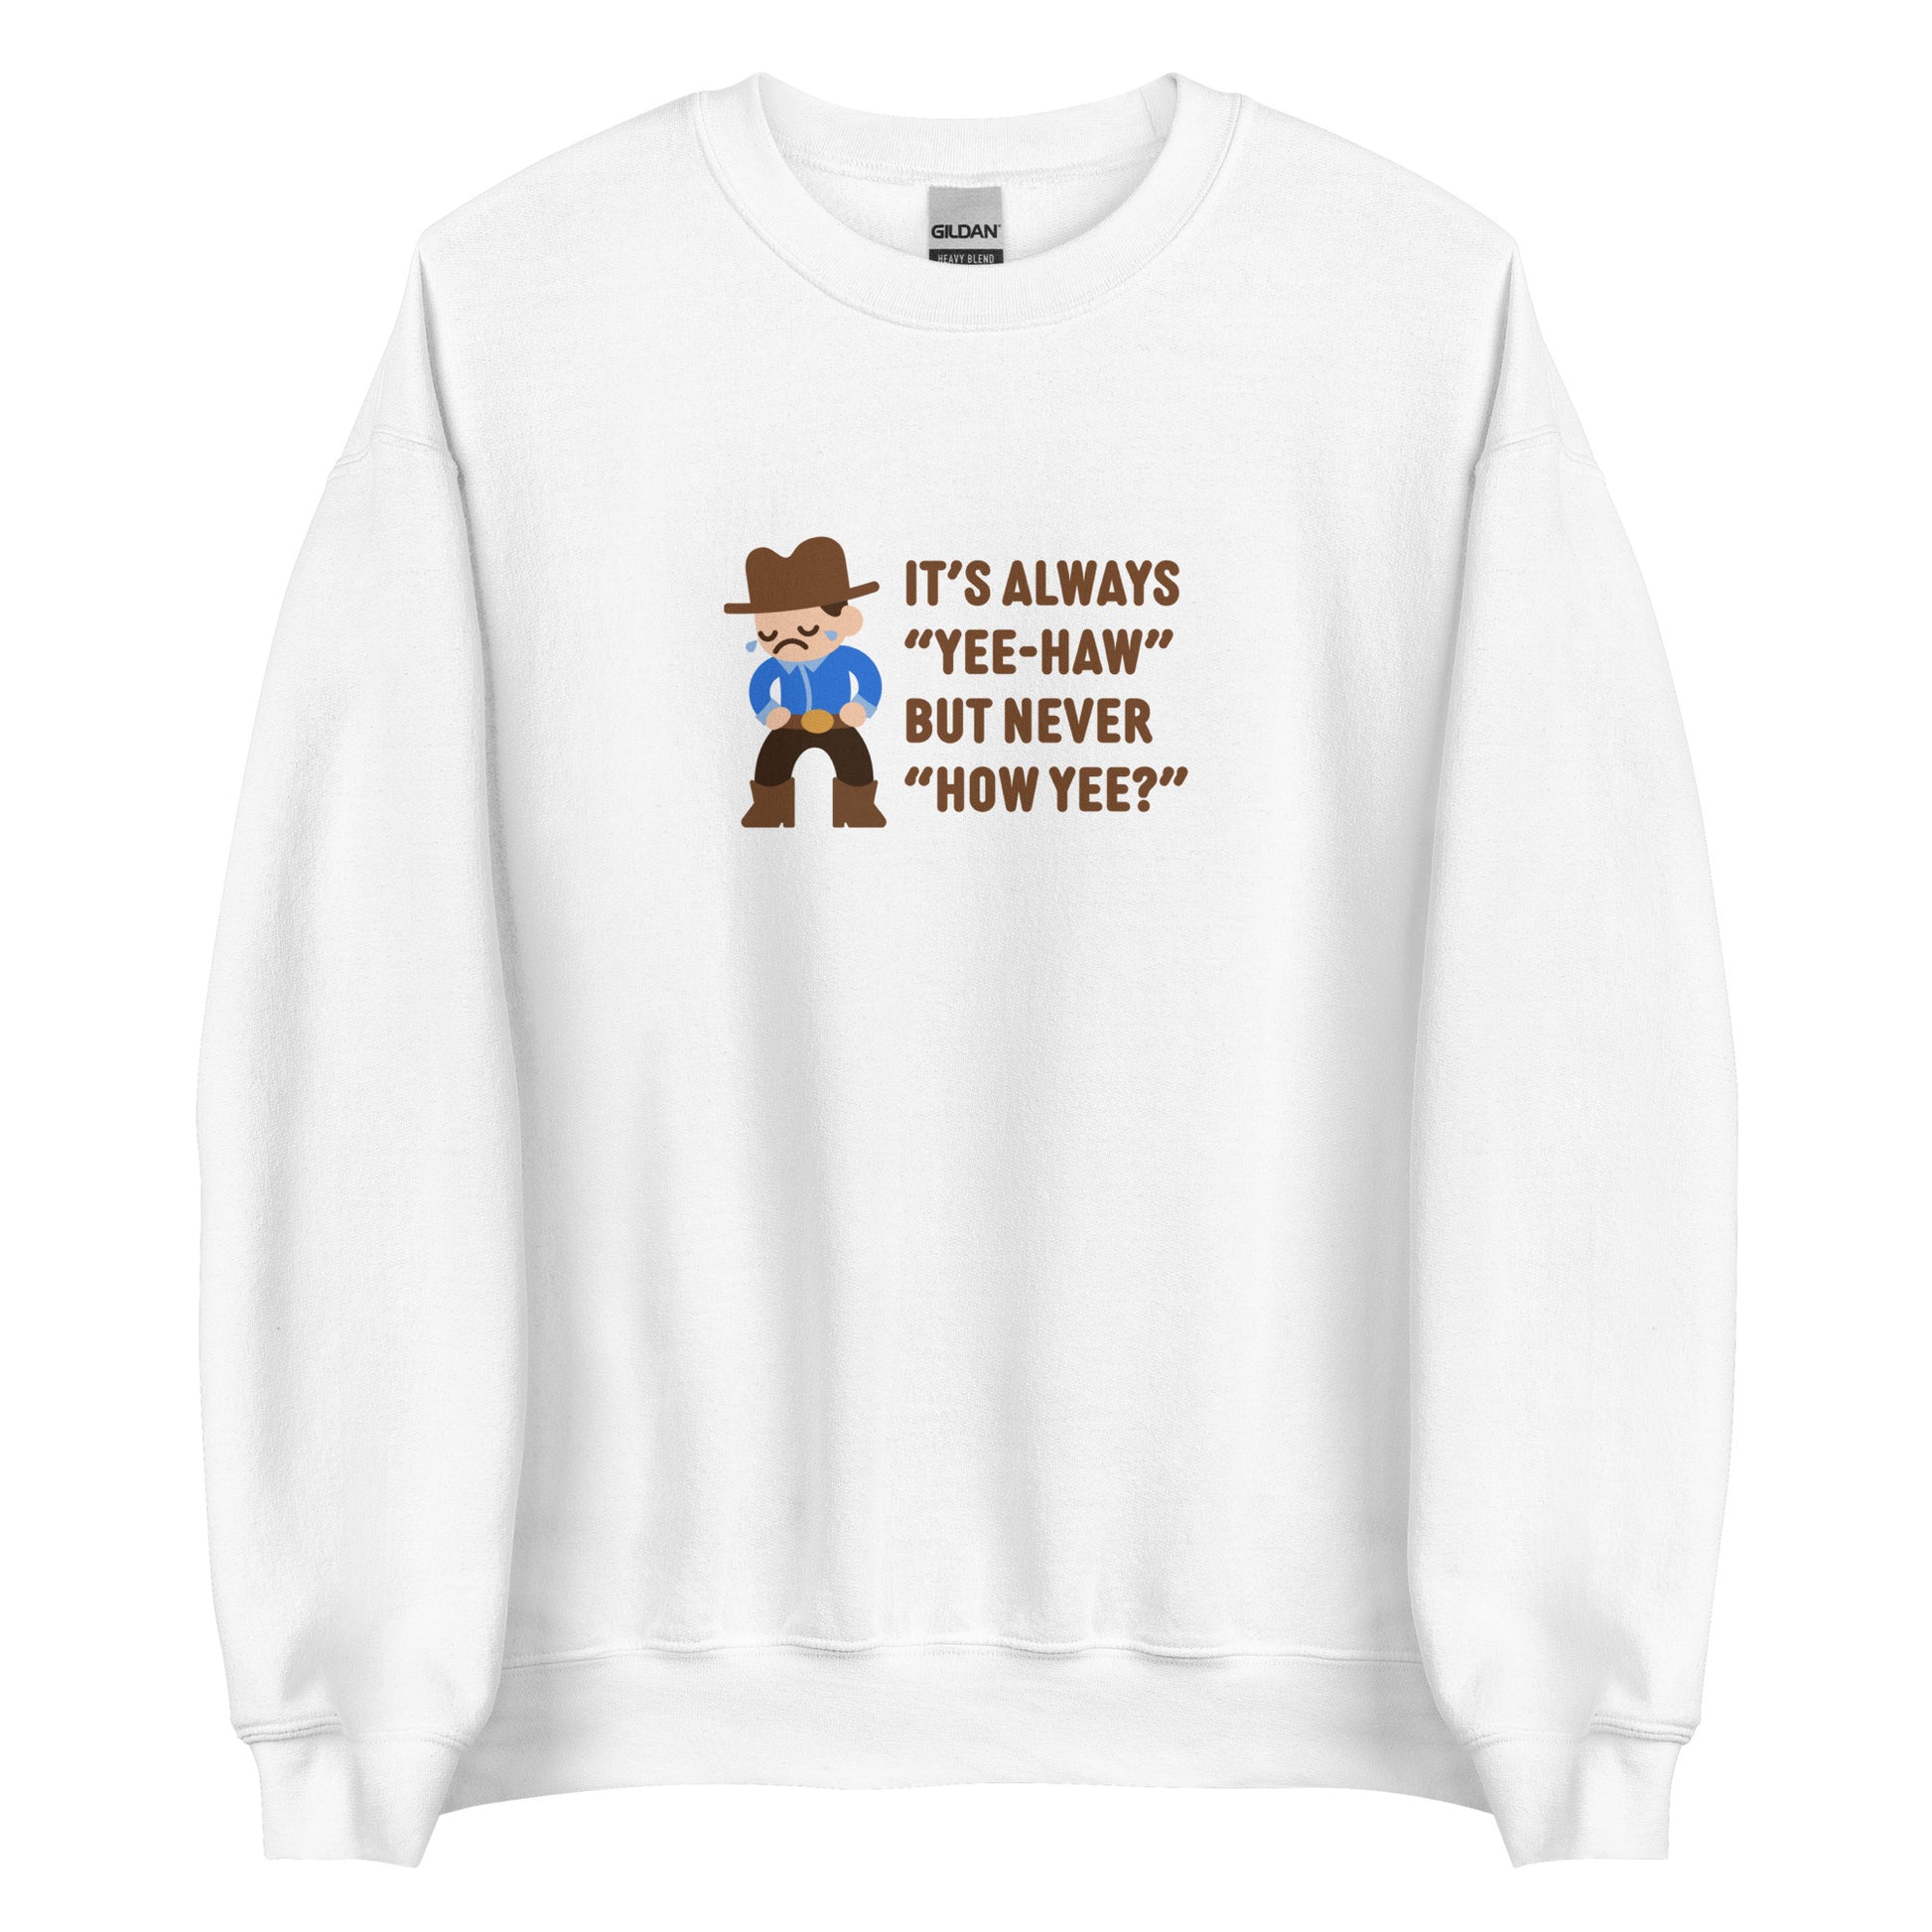 A white crewneck sweatshirt featuring an illustration of a crying cowboy wearing a blue shirt. Text alongside the cowboy reads "It's always "yee-haw" but never "How yee?""